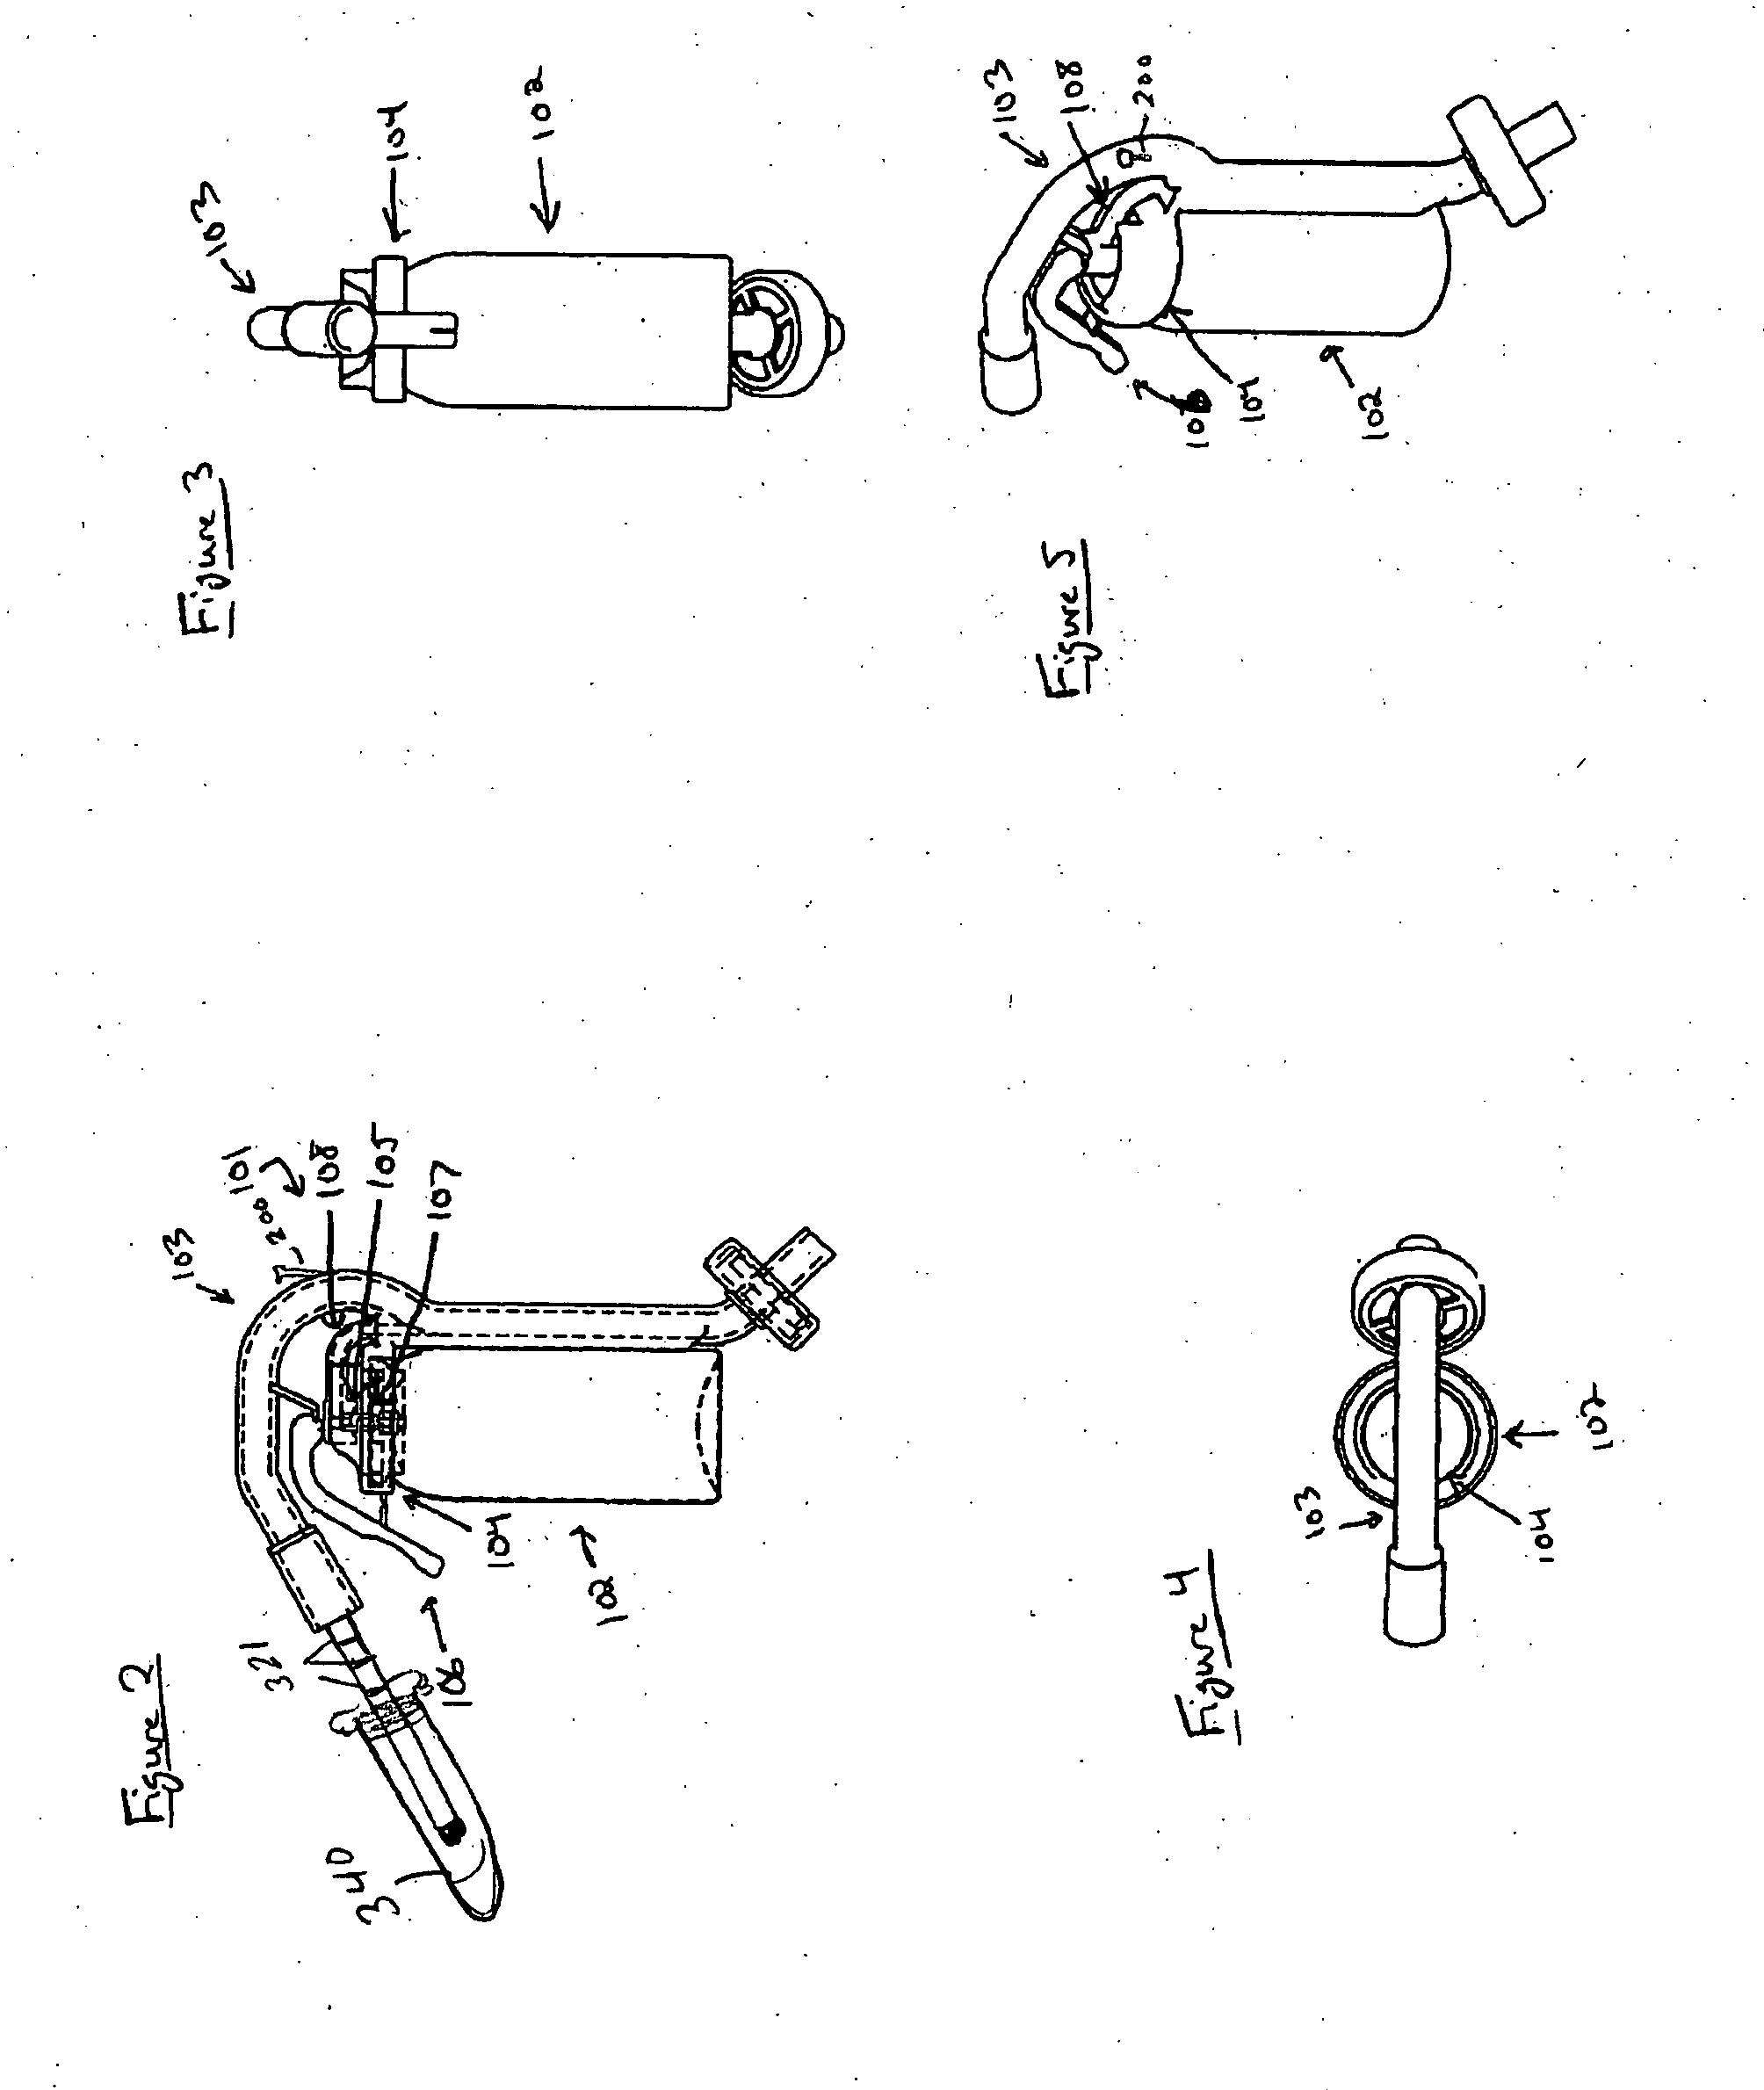 Portable suction device